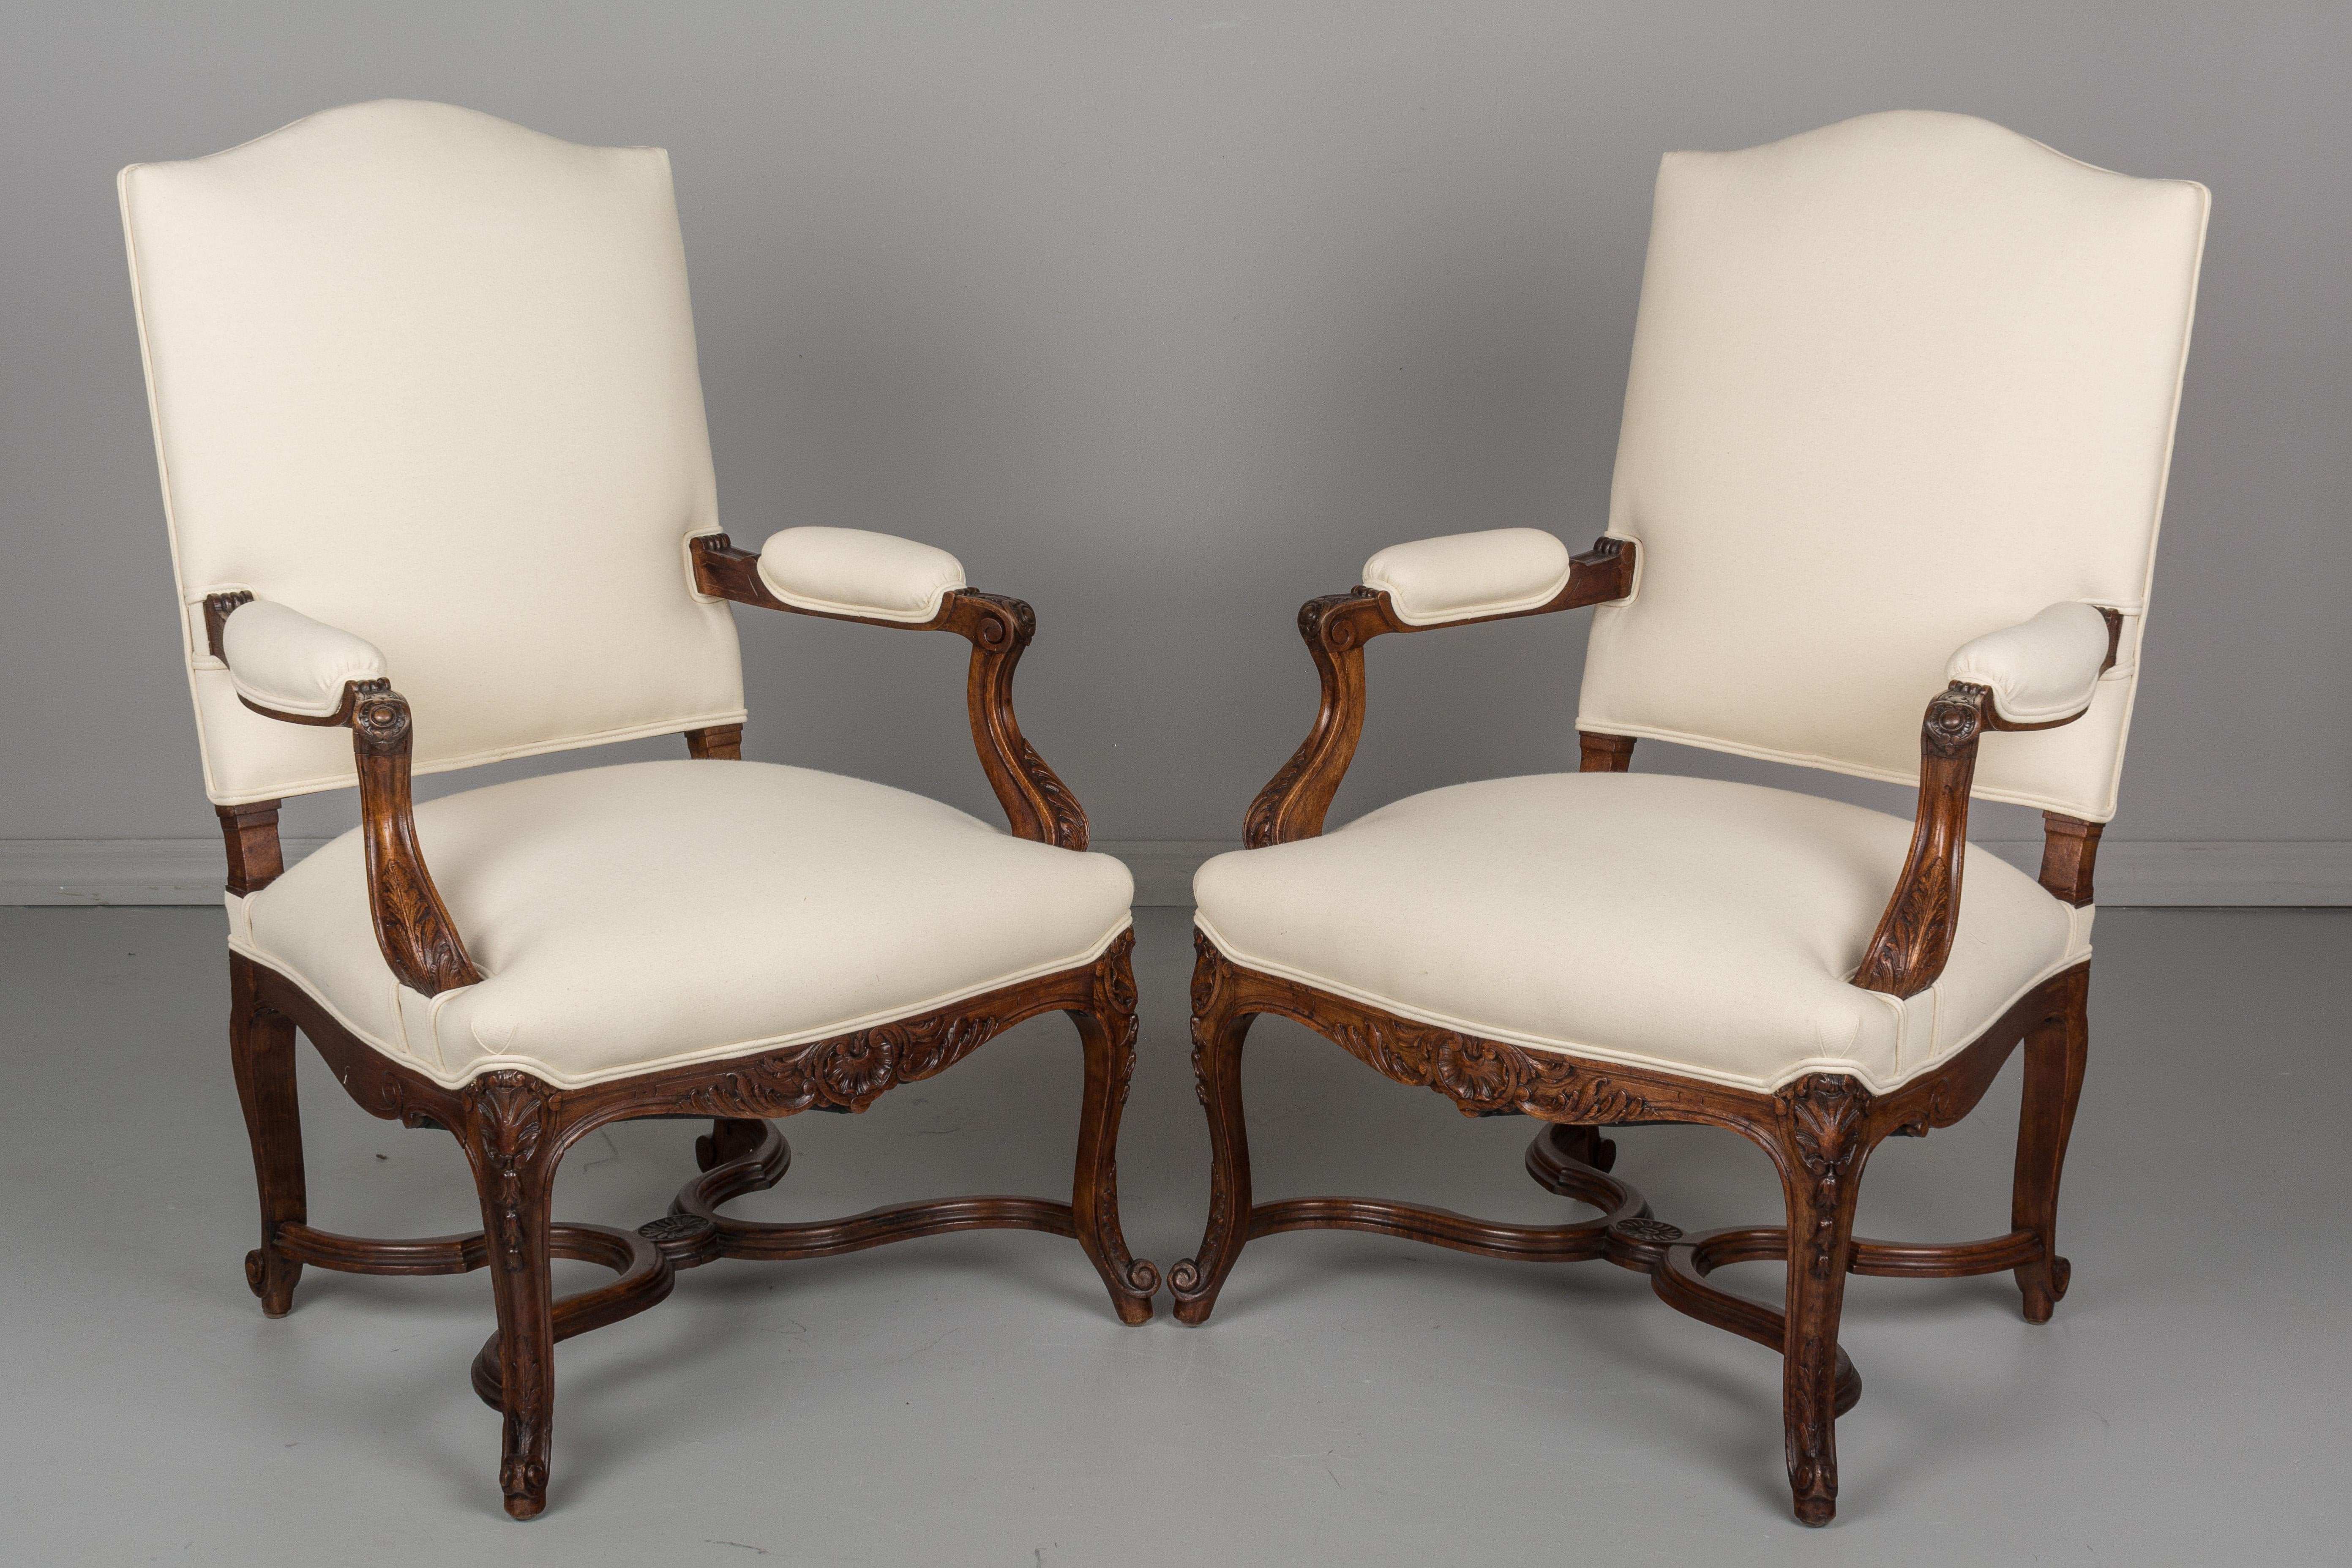 A pair French Regency style fauteuils, or arm chairs with hand carved walnut frames and X-stretcher. Sturdy with comfortable proportions. Upholstered in a new natural cotton canvas fabric. Please refer to photos for more details. We have a large